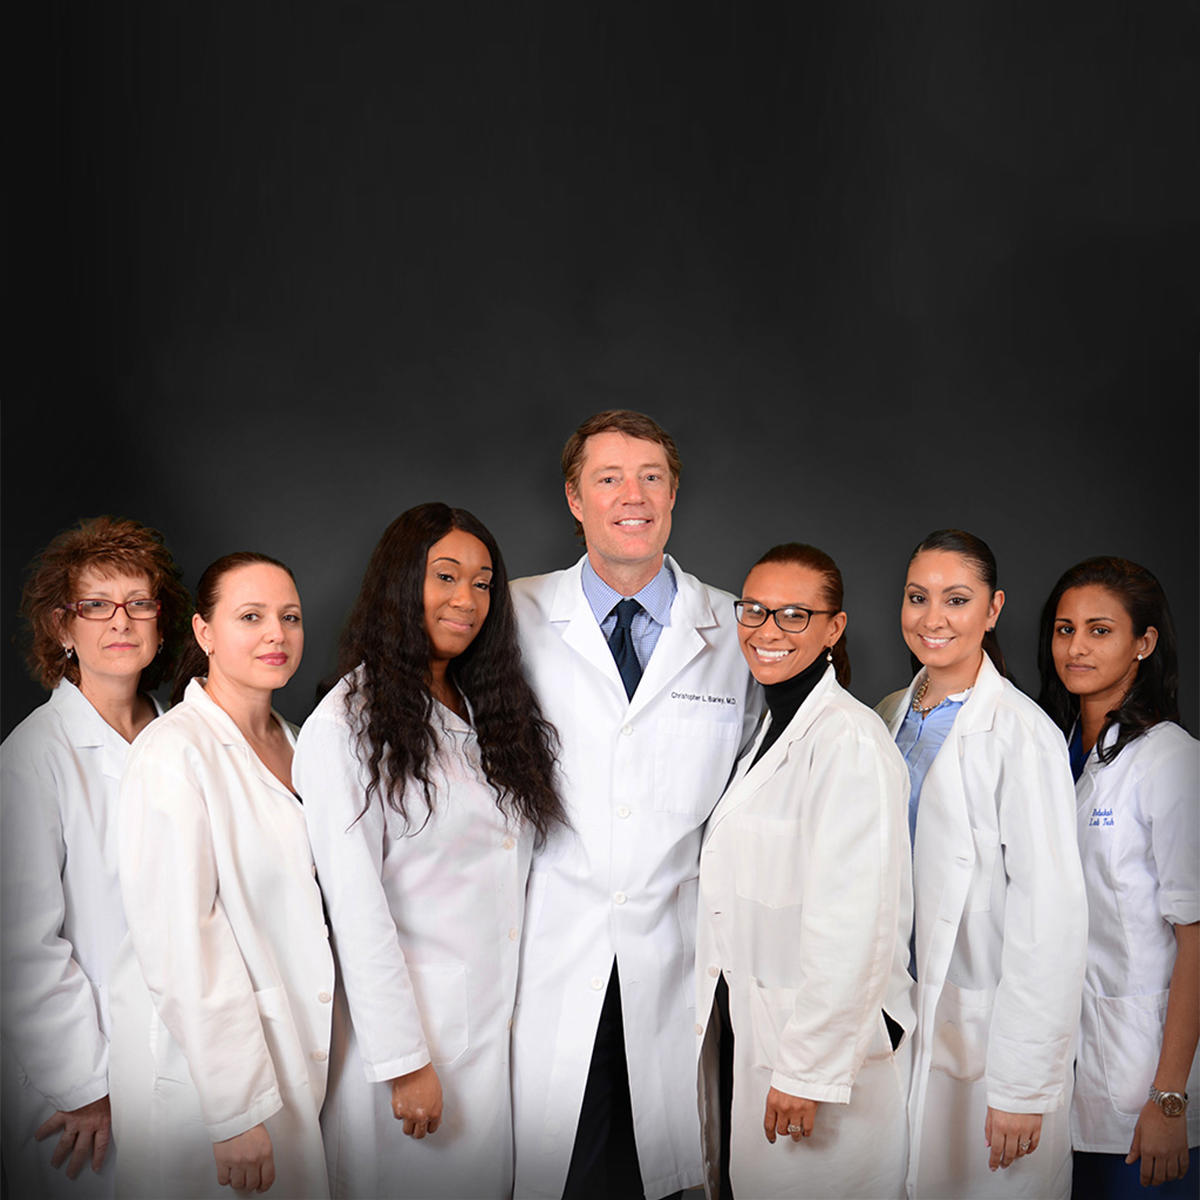 Our team of New York physicians incorporate the latest medical technology when diagnosing & treating patients. Dr. Barley & his staff of talented professionals have a wealth of experience providing internal medicine services for both complex & common health conditions.